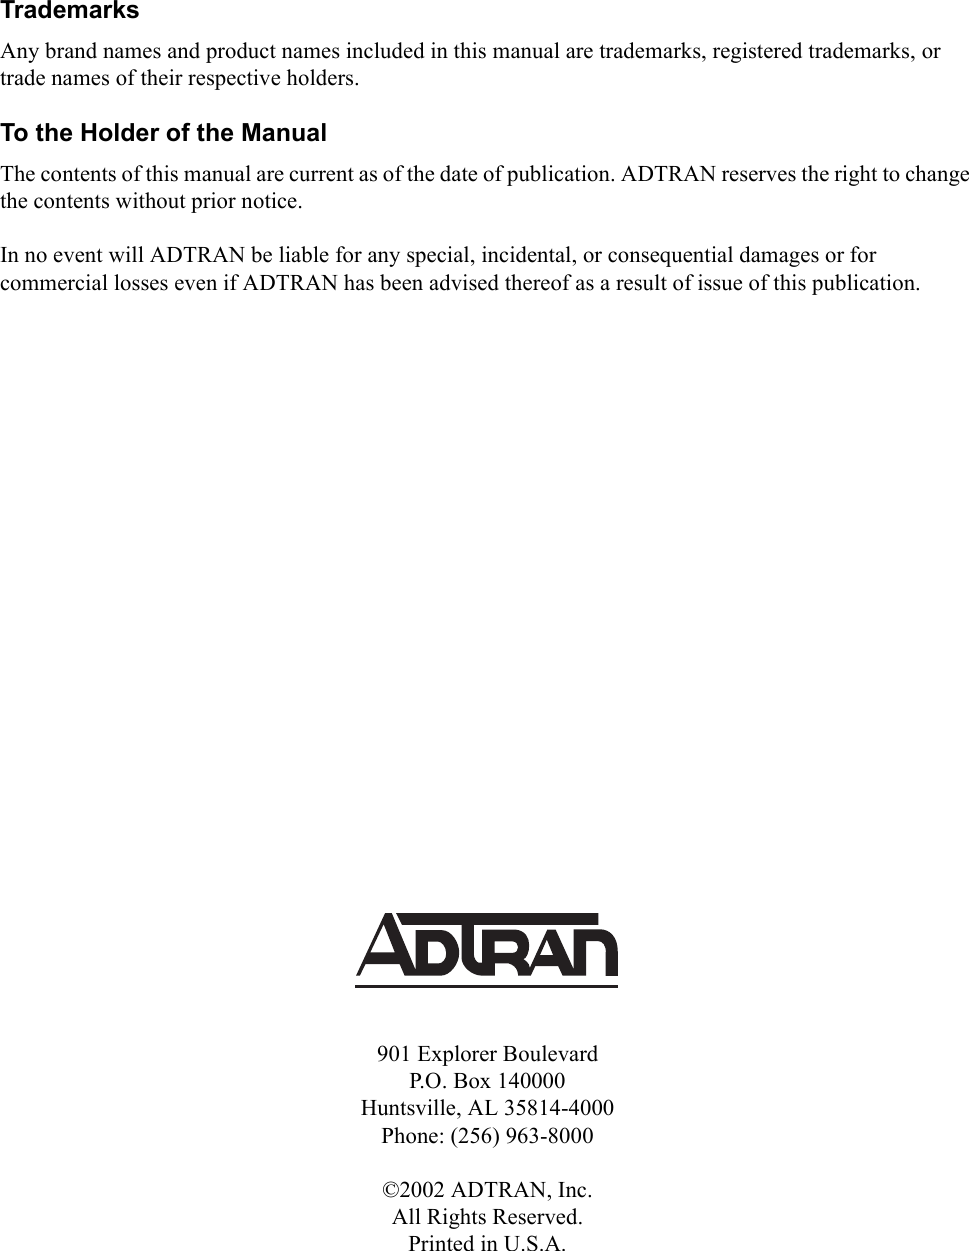 TrademarksAny brand names and product names included in this manual are trademarks, registered trademarks, or trade names of their respective holders.To the Holder of the ManualThe contents of this manual are current as of the date of publication. ADTRAN reserves the right to change the contents without prior notice.In no event will ADTRAN be liable for any special, incidental, or consequential damages or for commercial losses even if ADTRAN has been advised thereof as a result of issue of this publication.901 Explorer BoulevardP.O. Box 140000Huntsville, AL 35814-4000Phone: (256) 963-8000©2002 ADTRAN, Inc.All Rights Reserved.Printed in U.S.A.